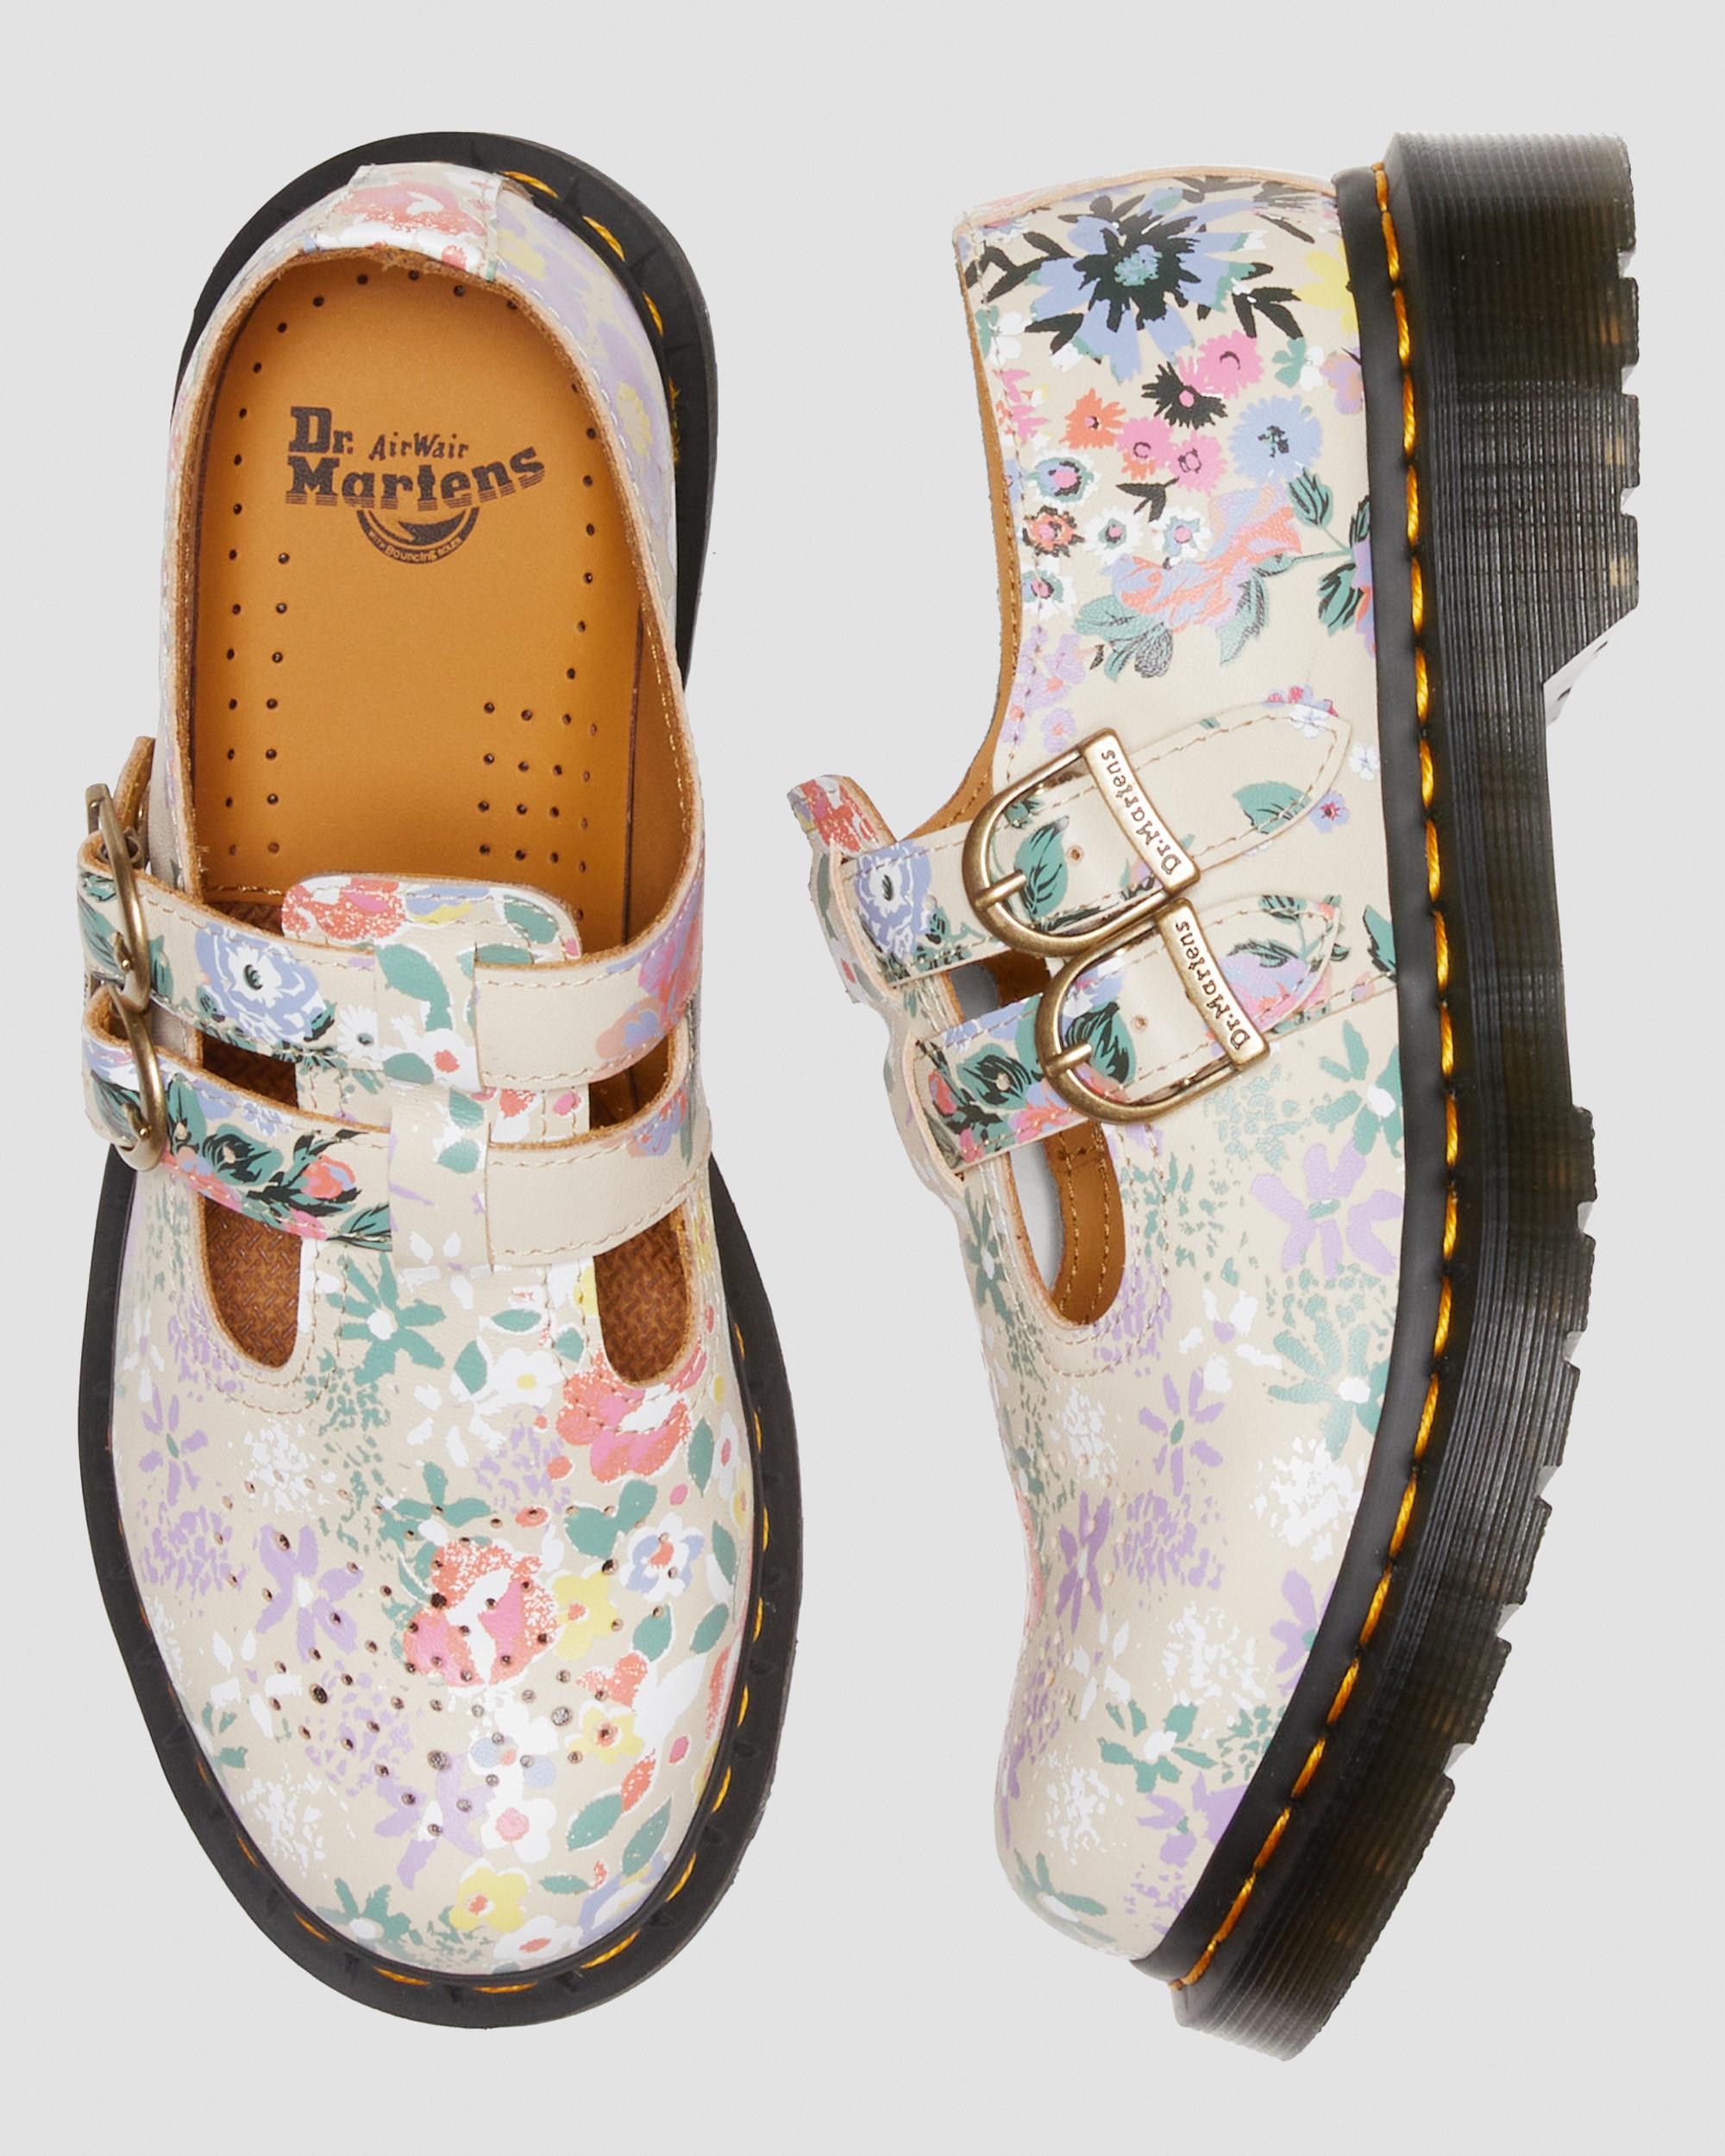 Leather Beige Mash Up | 8065 Parchment Dr. Mary Martens Jane Shoes in Floral